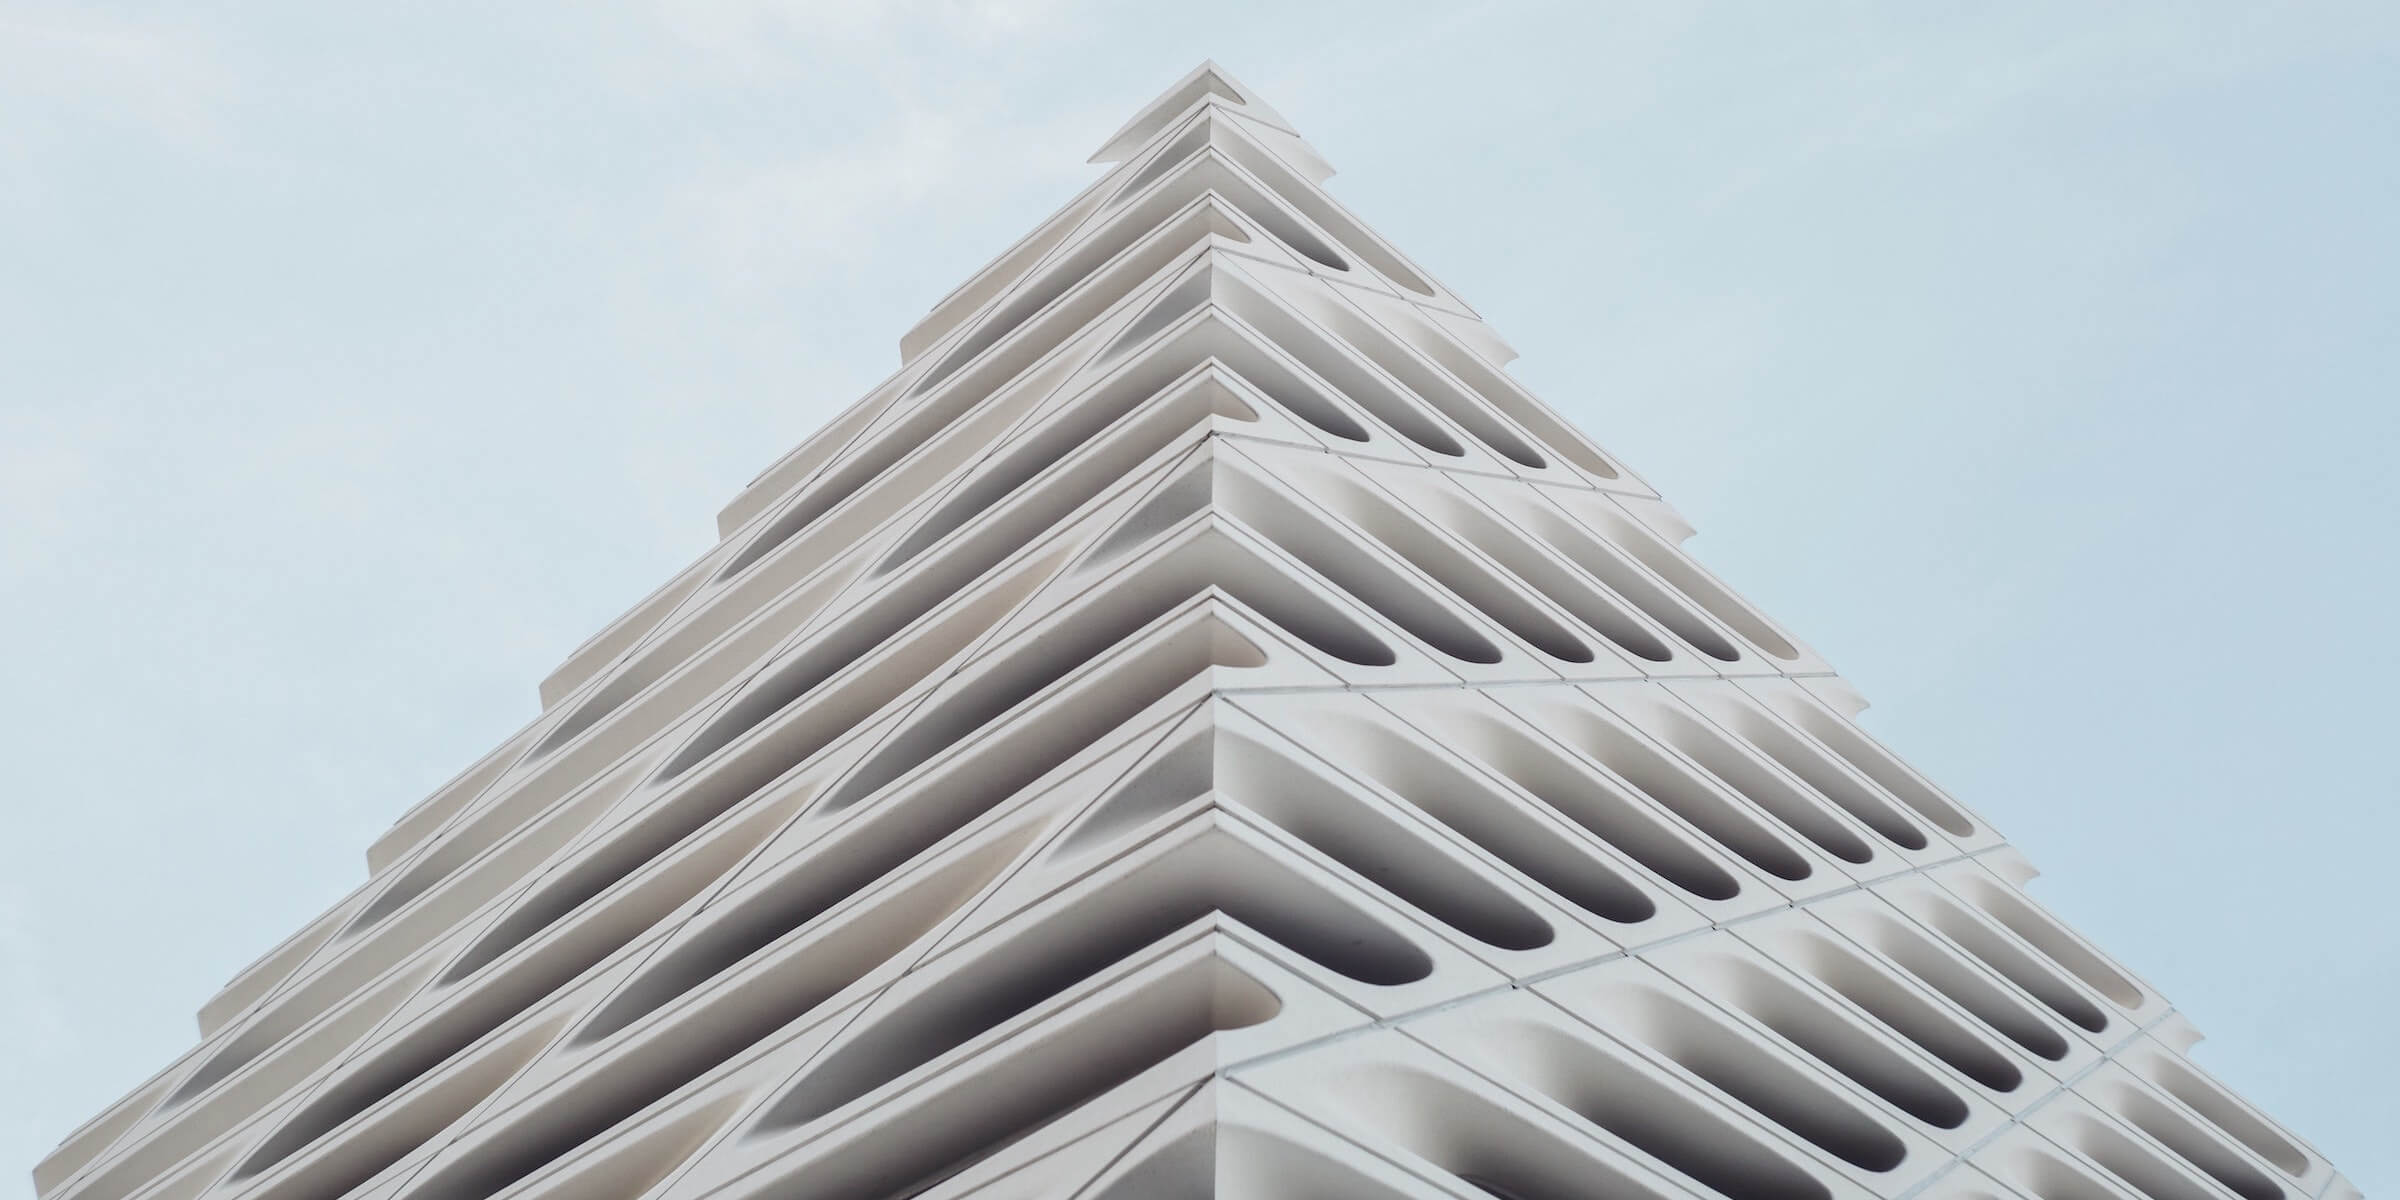 A building with a unique design, angled to the camera in the shape of a triangle